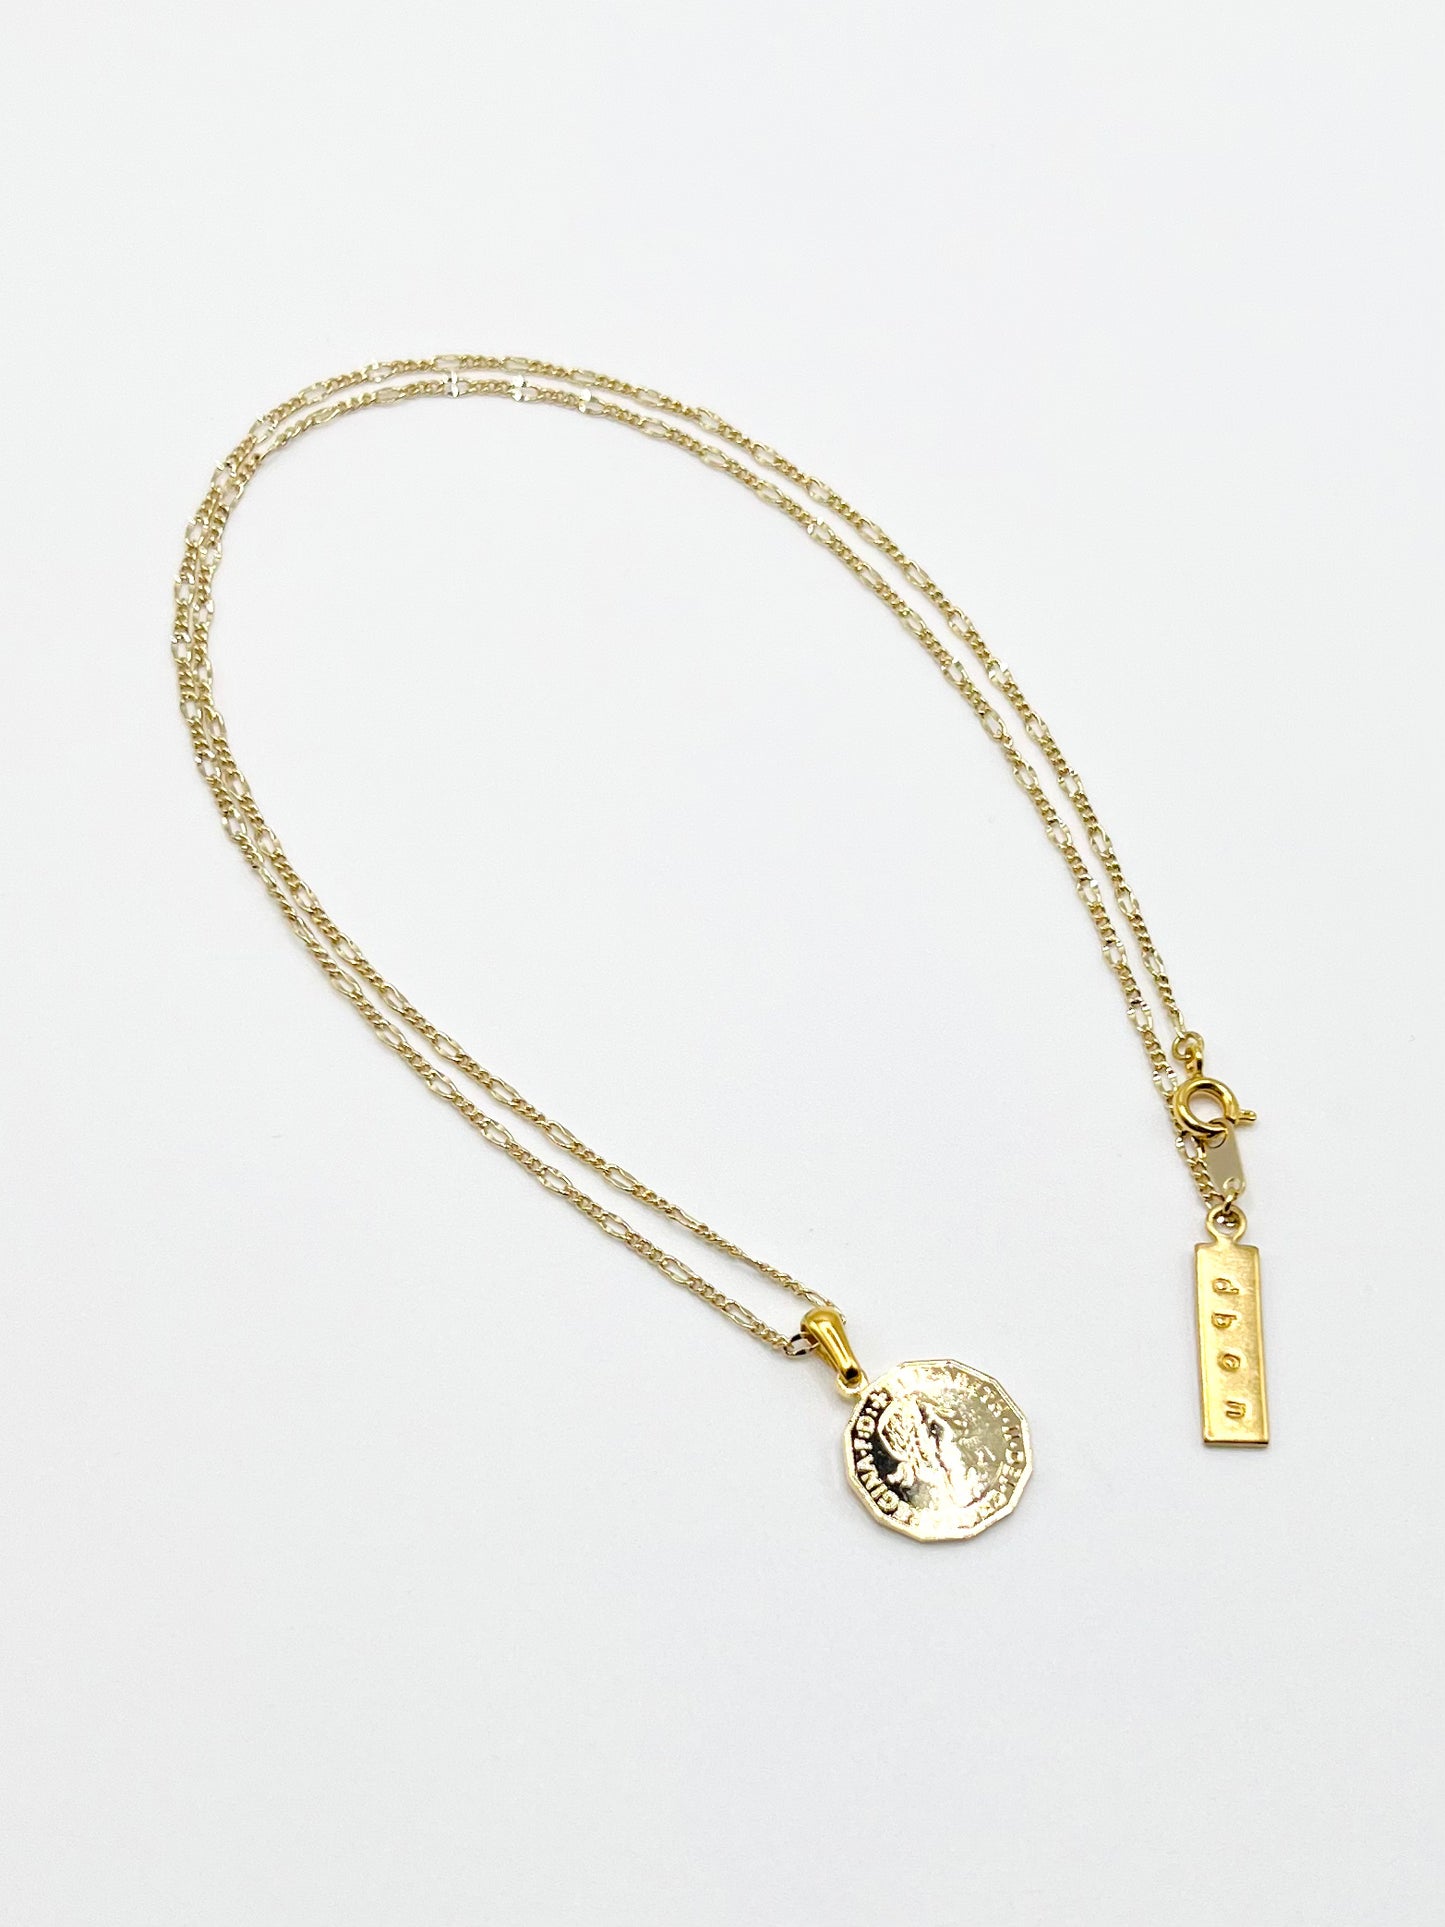 NW coin motif necklace - Gold